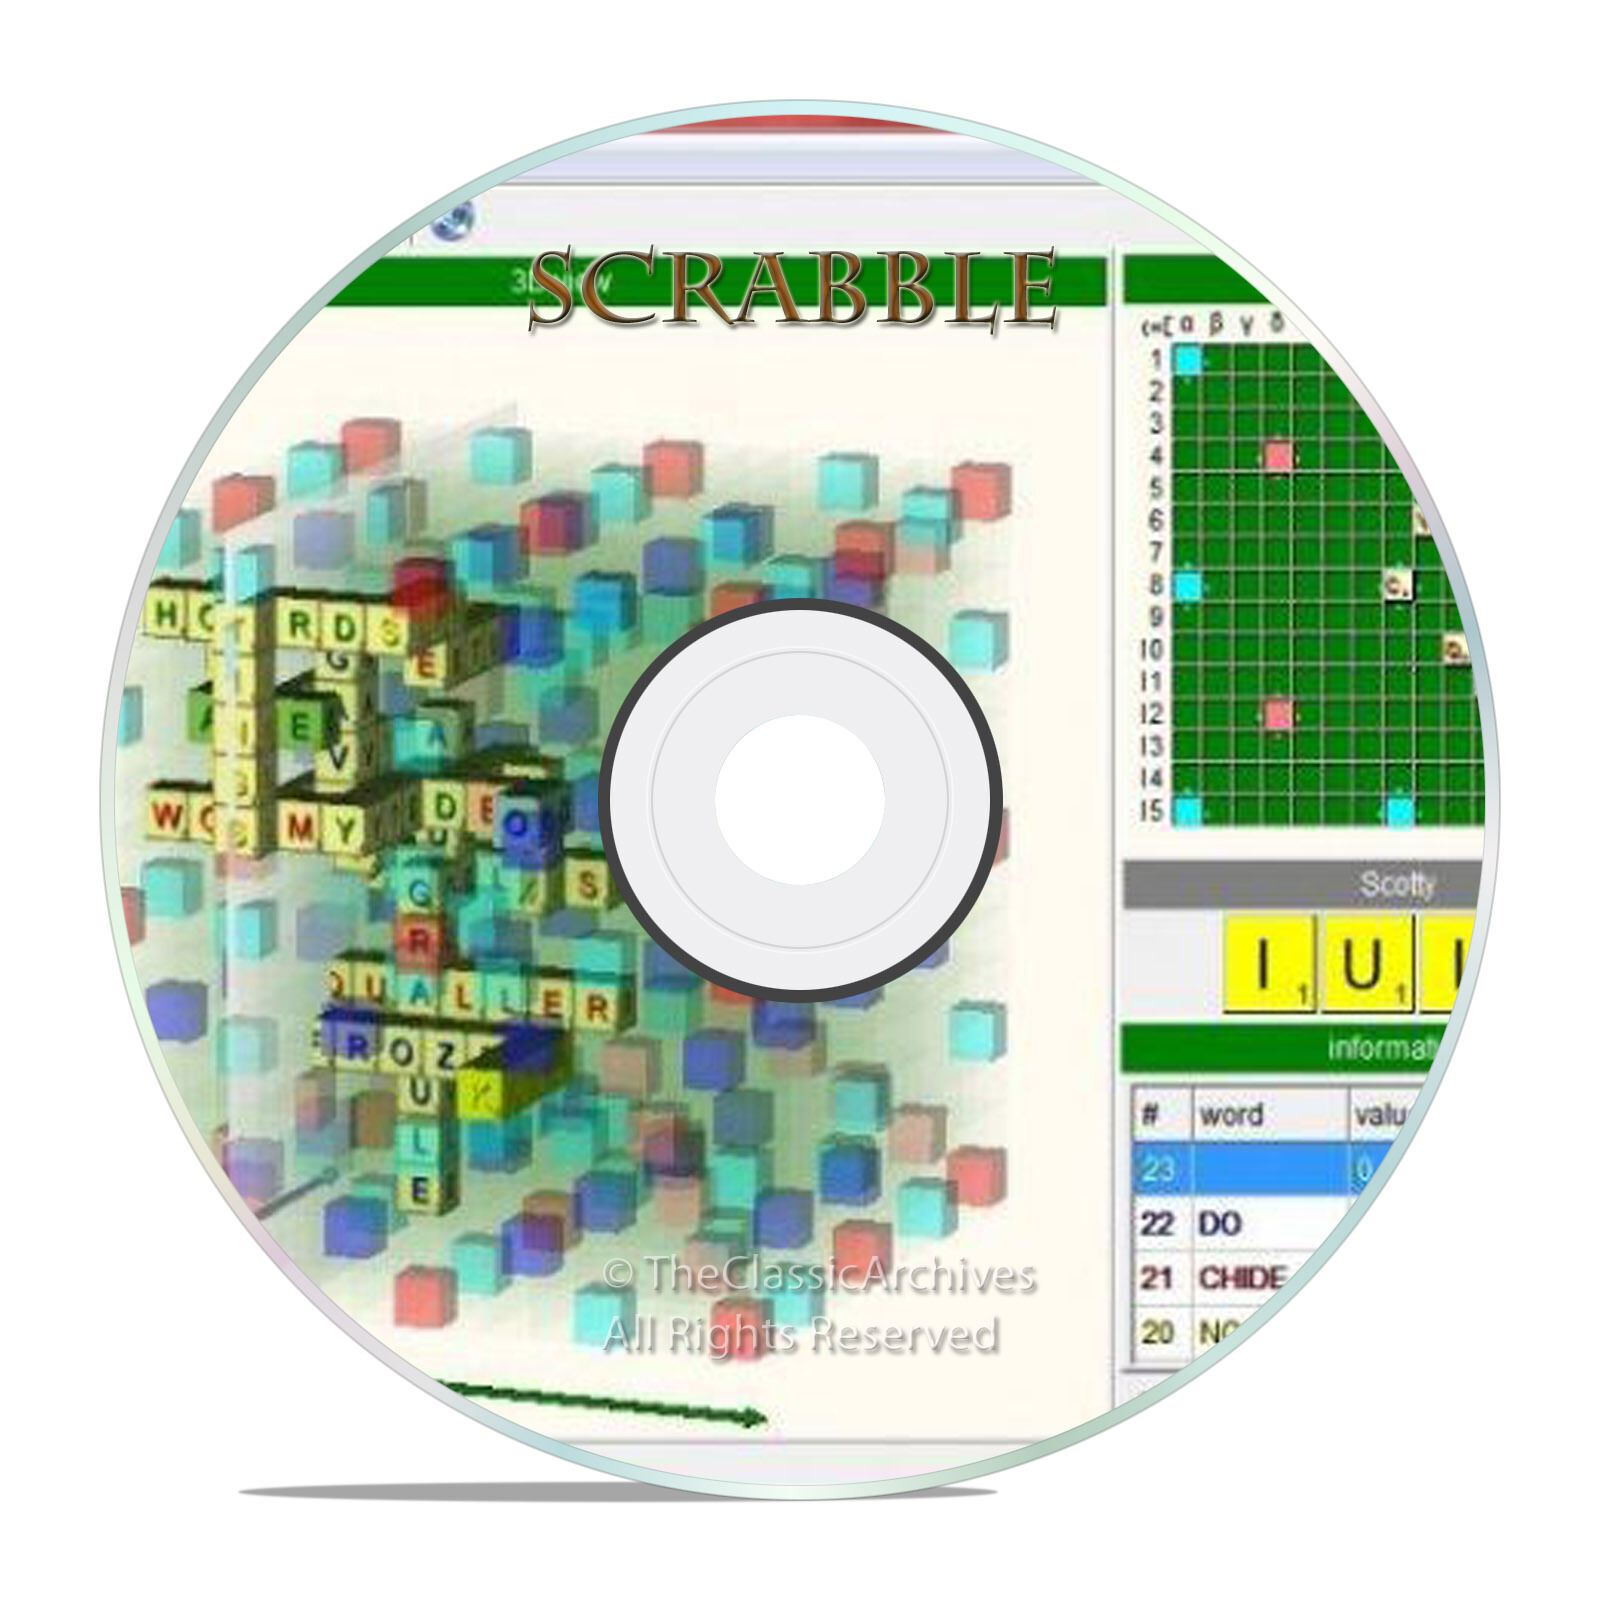 SCRABBLE 3D, PC GAME, CROSSWORD, PUZZLES, WORD GAME, CLASSIC BOARD FAMILY GAME